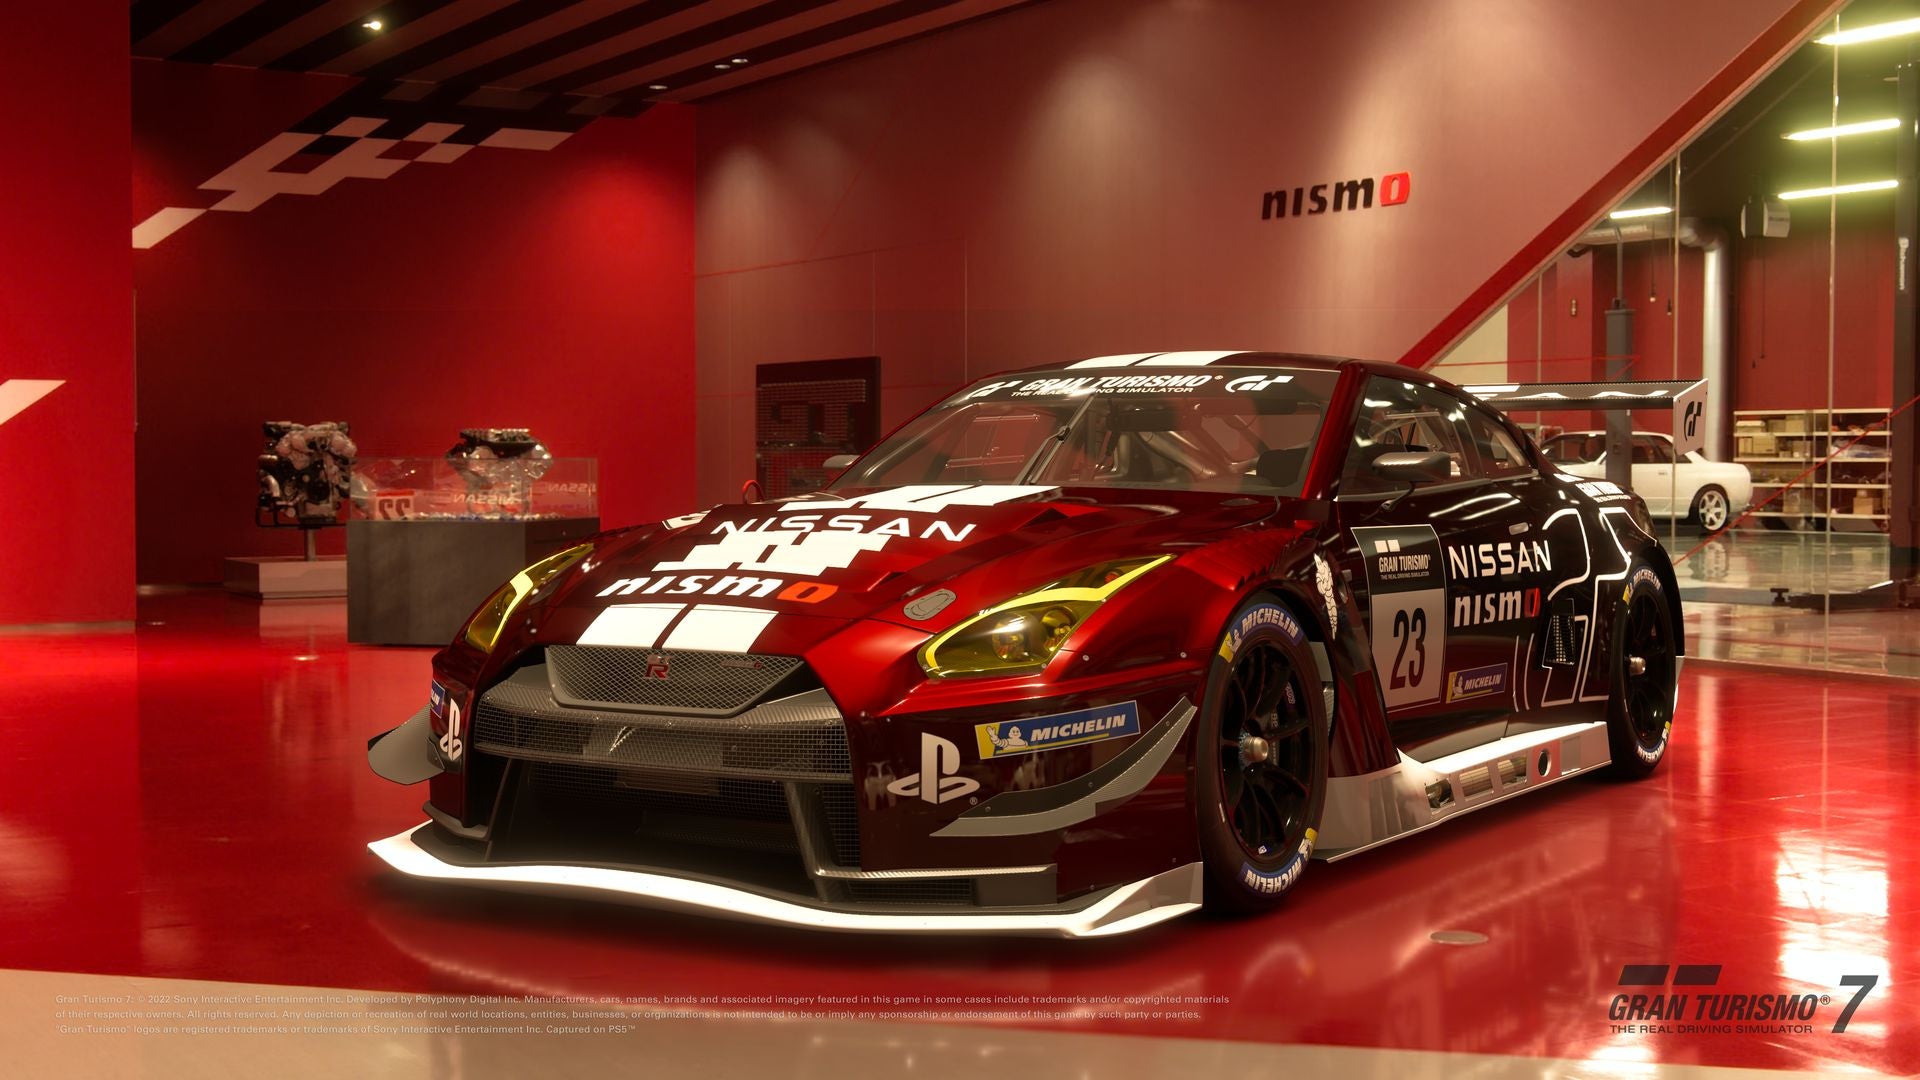 Gran Turismo 7’s Next Update Completes the GT-R Family, But Brings No New Track